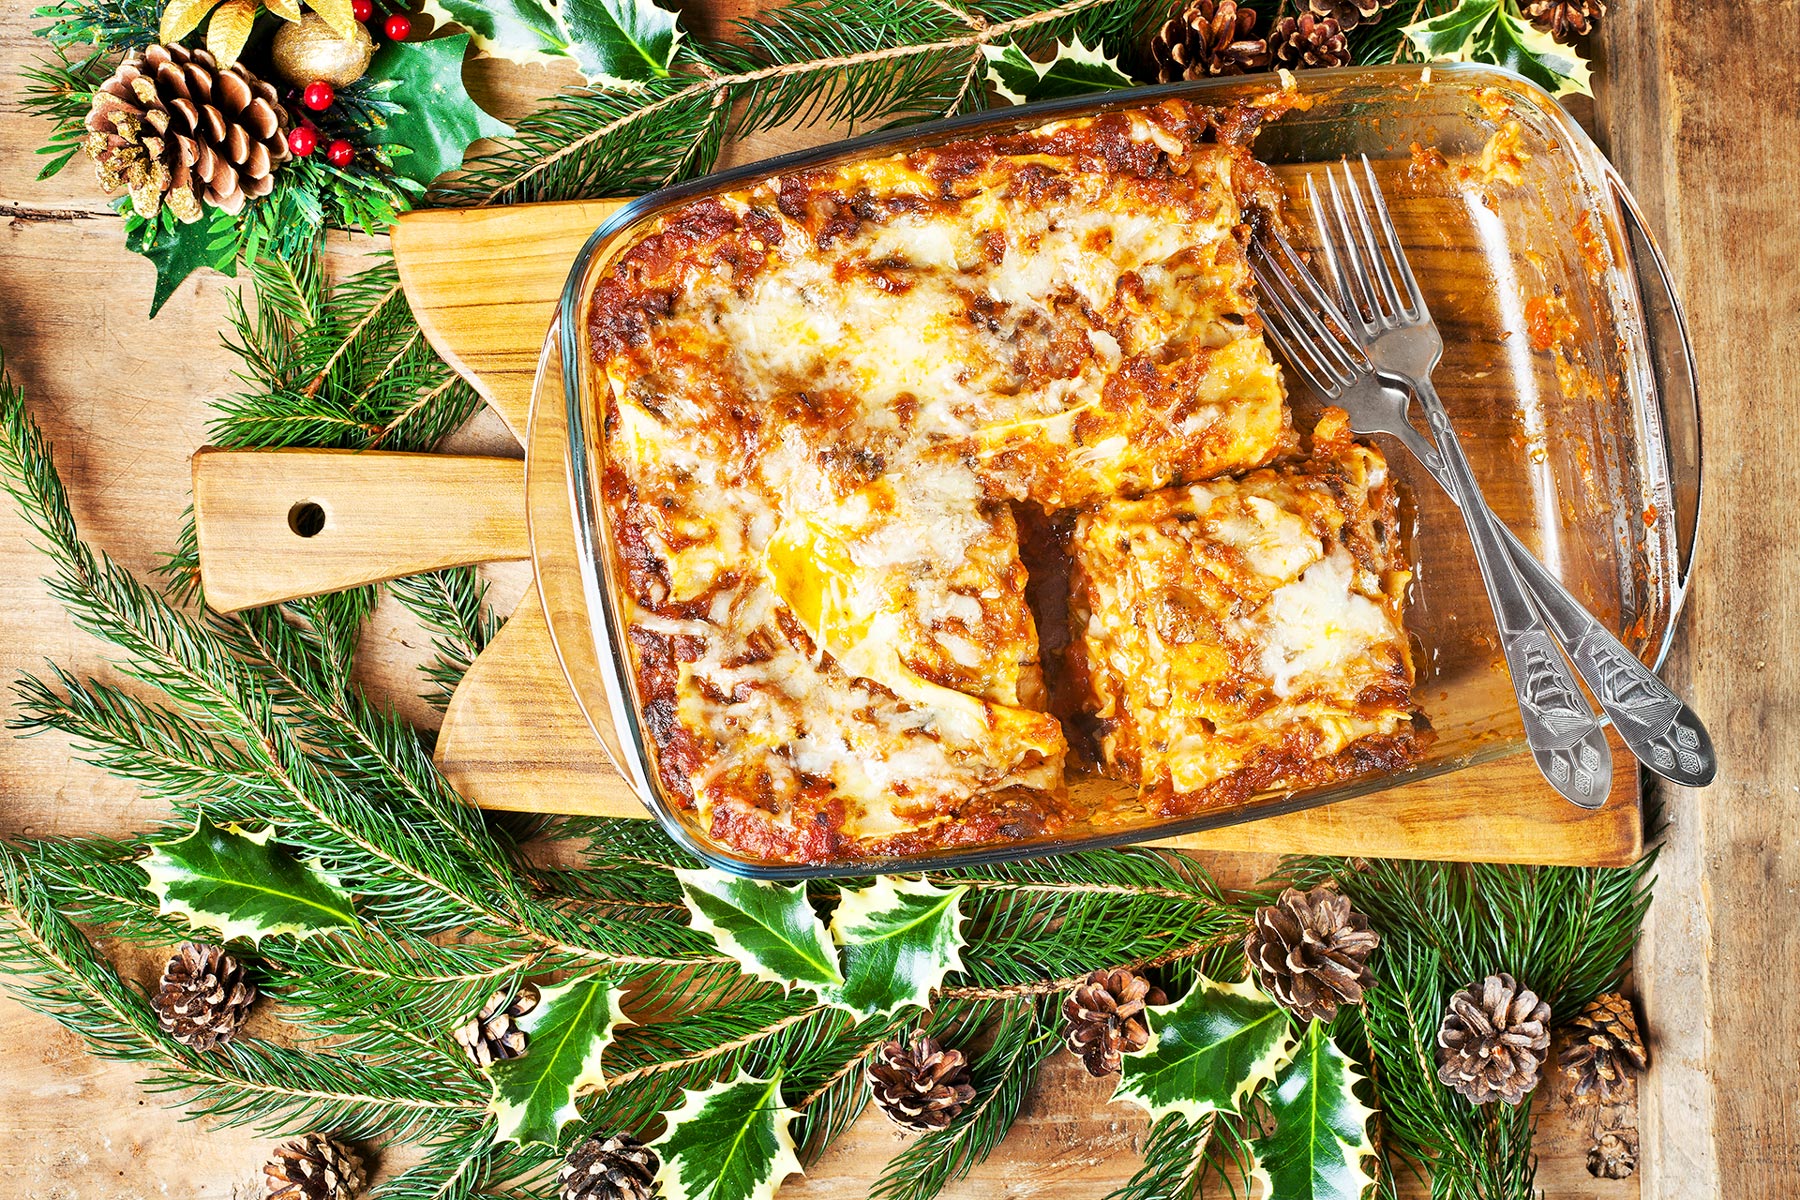 holiday catering menu orange county - Christmas background with lasagna. Italian homemade family dish